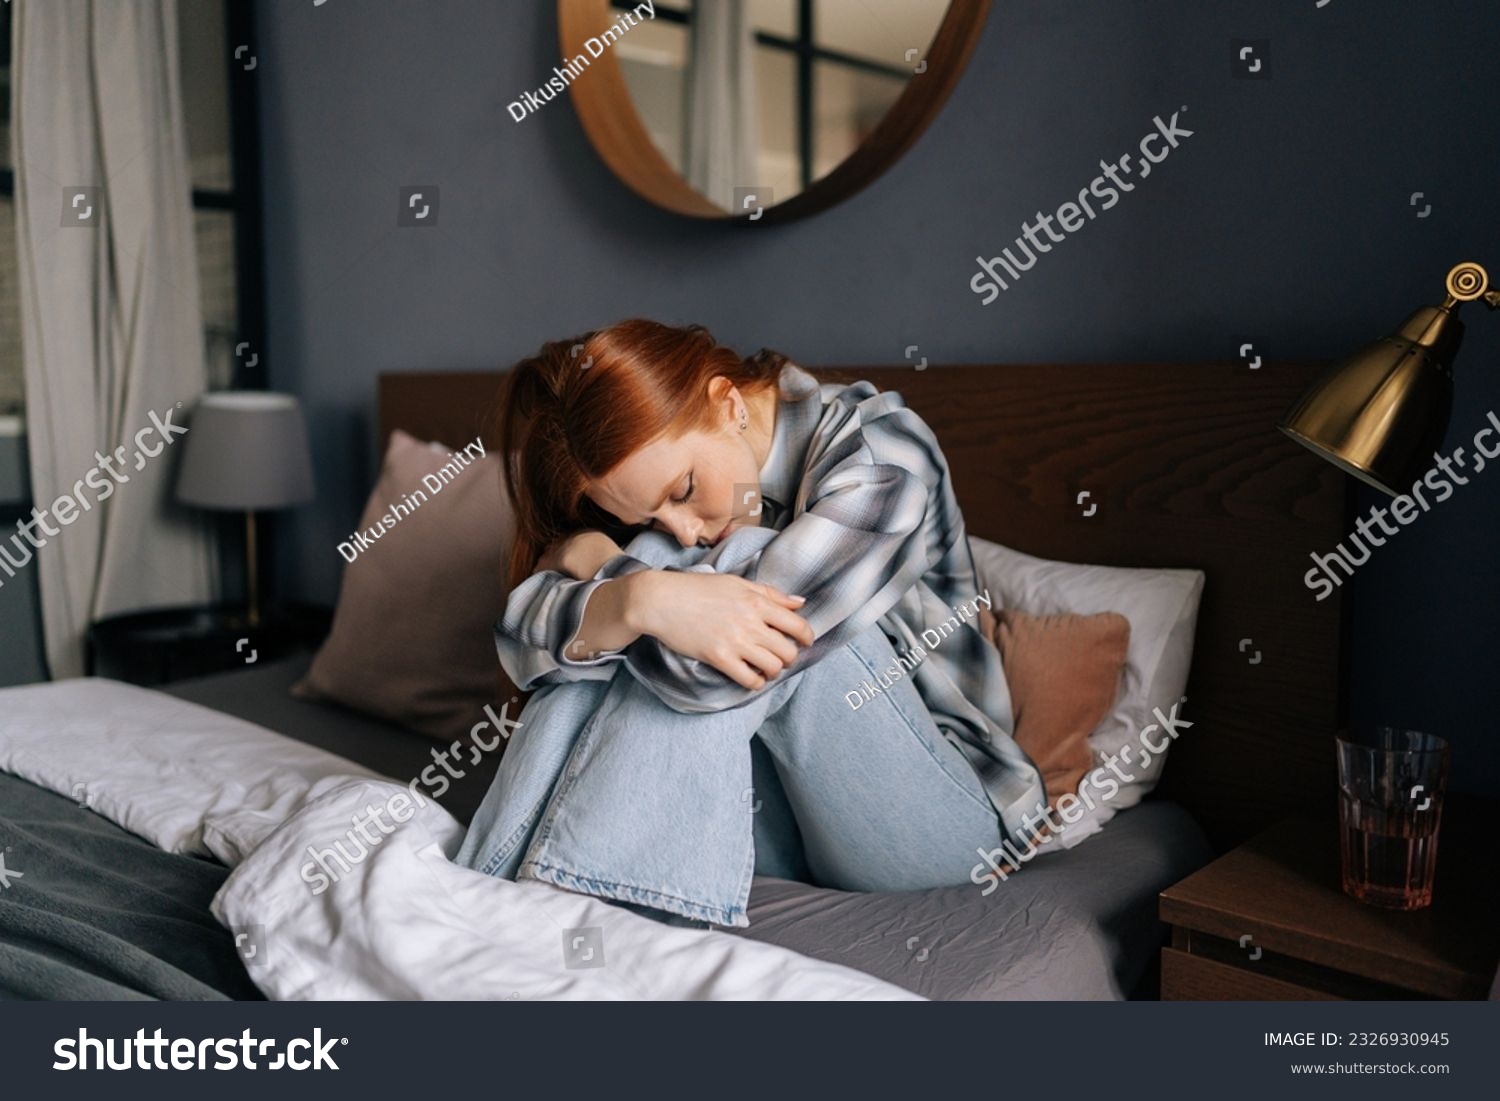 Portrait of sad upset millennial redhead female sitting on bed embrace knees lost in bad pessimistic thoughts suffer alone. Stressed young woman feel lonely desperate has broken heart. #2326930945